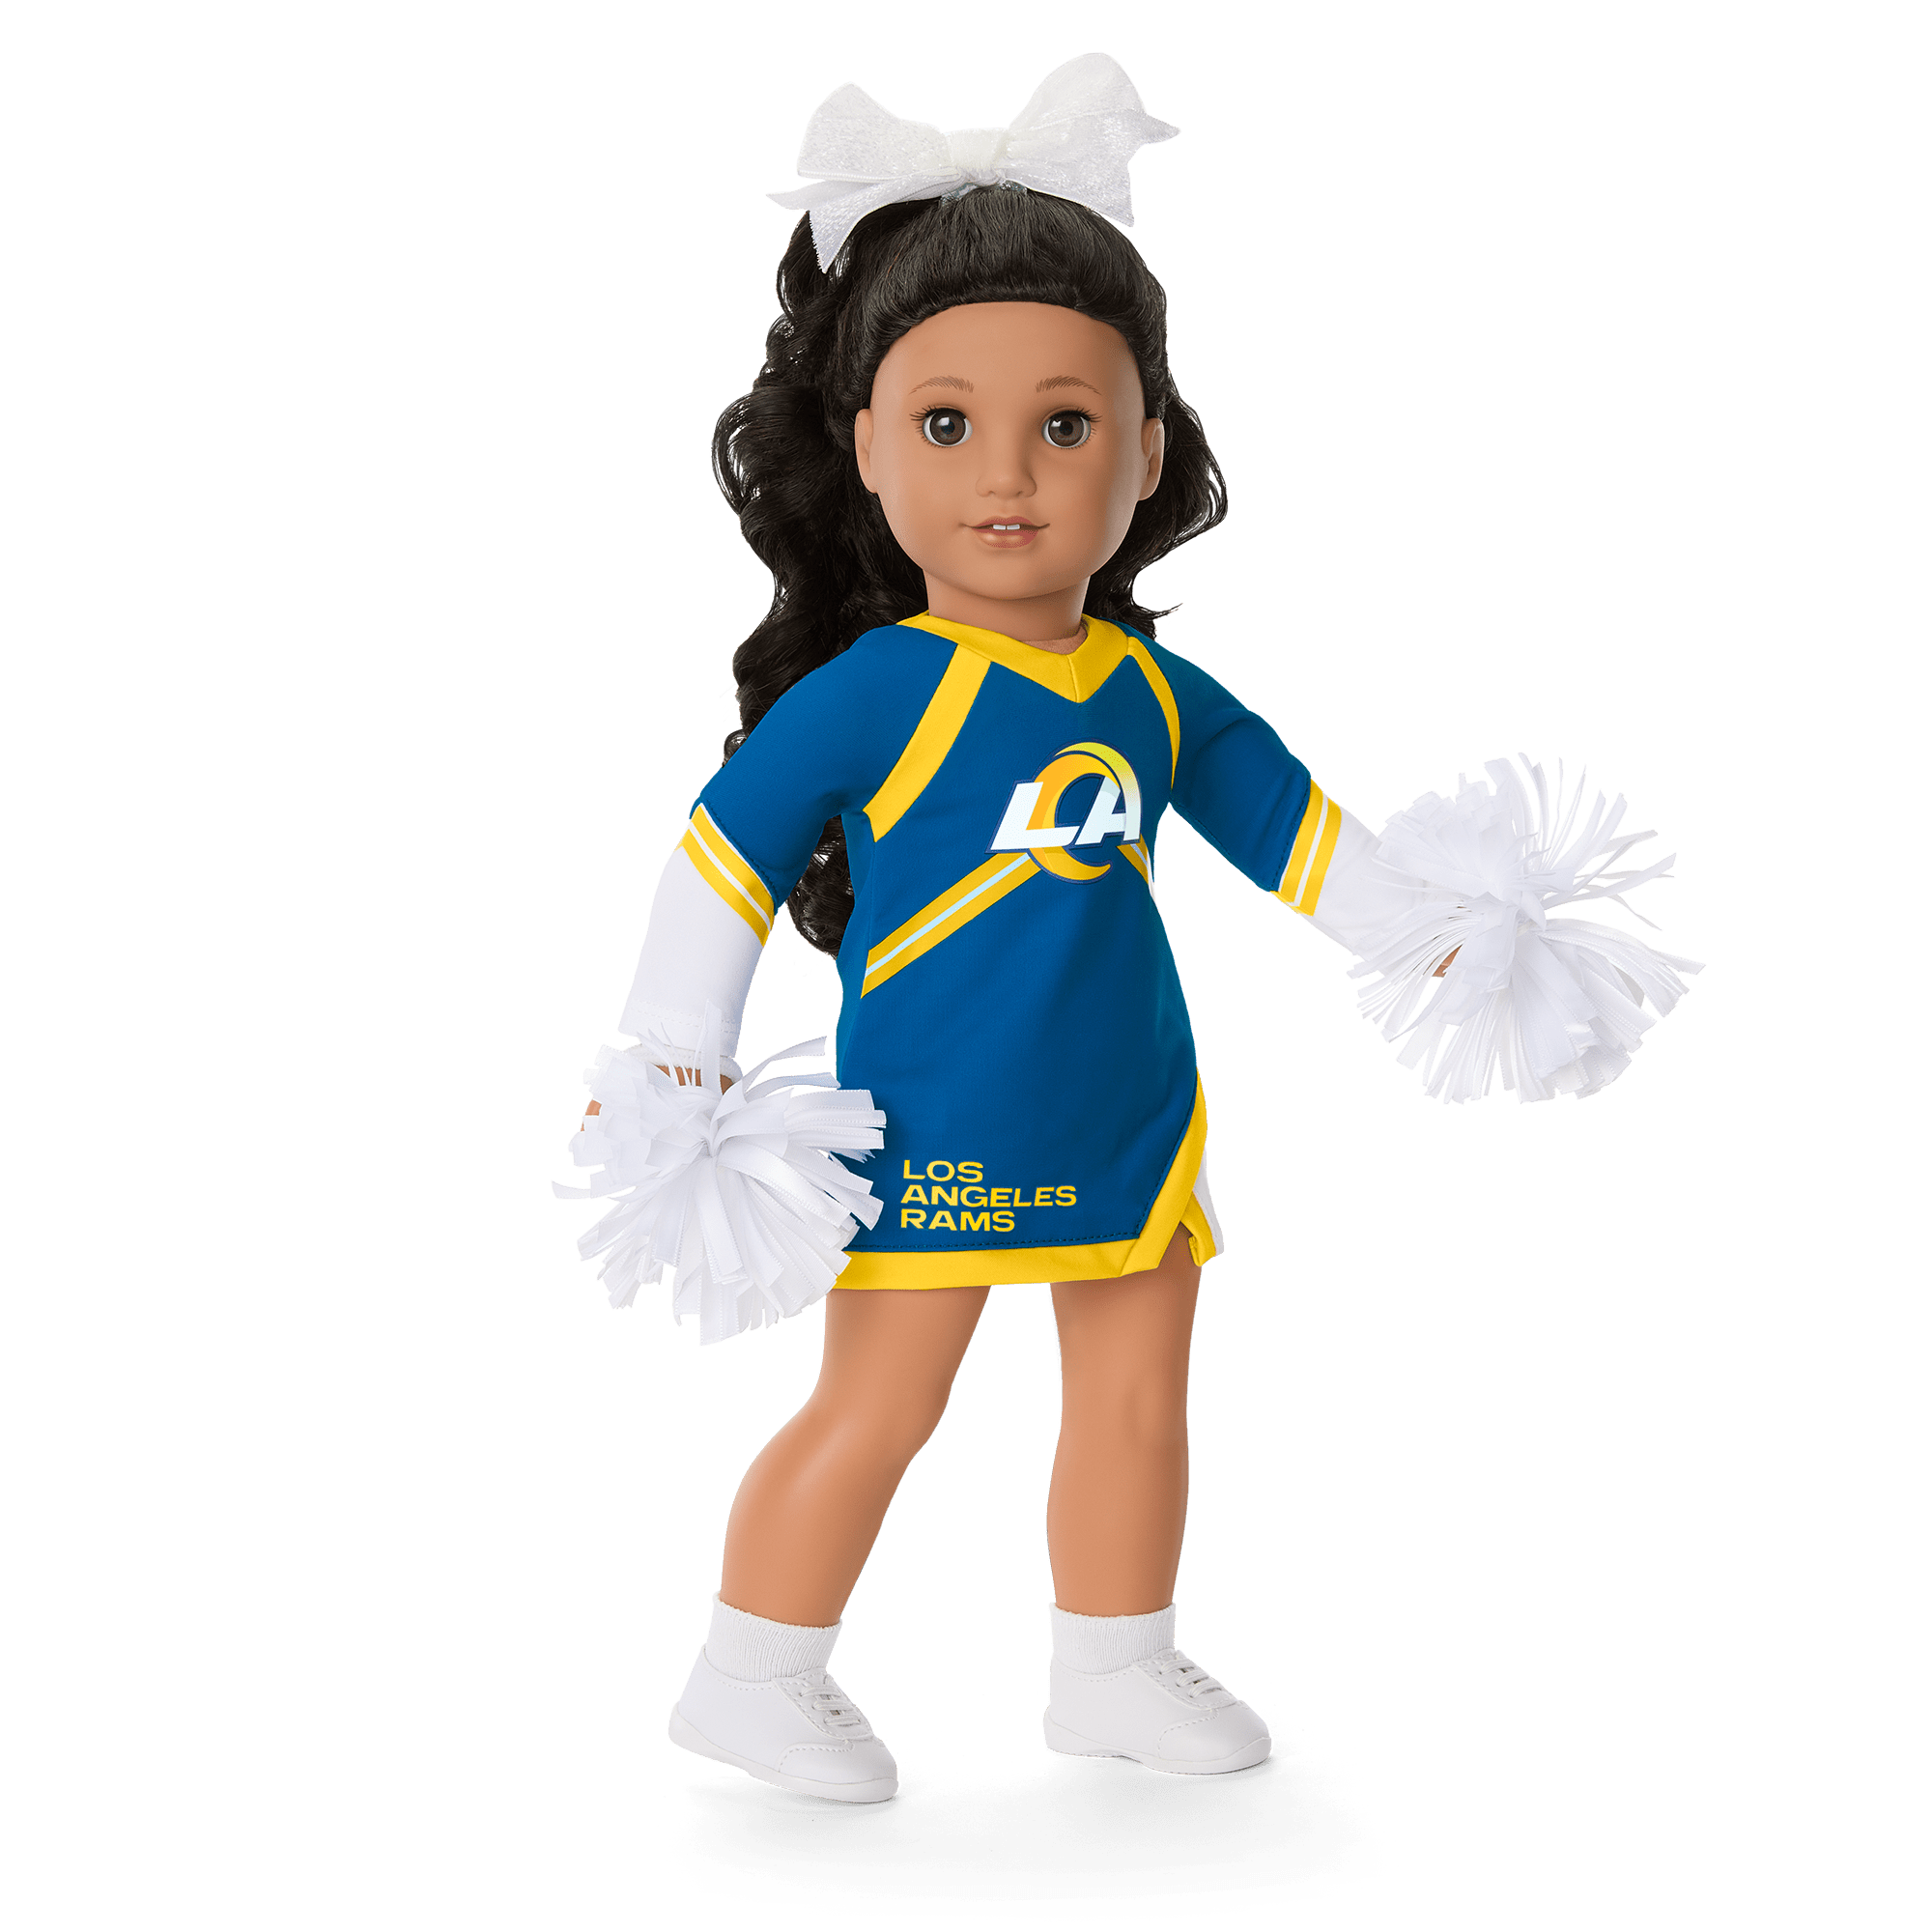 18 Doll Blue/Orange Cheerleader Outfit - The Doll Boutique